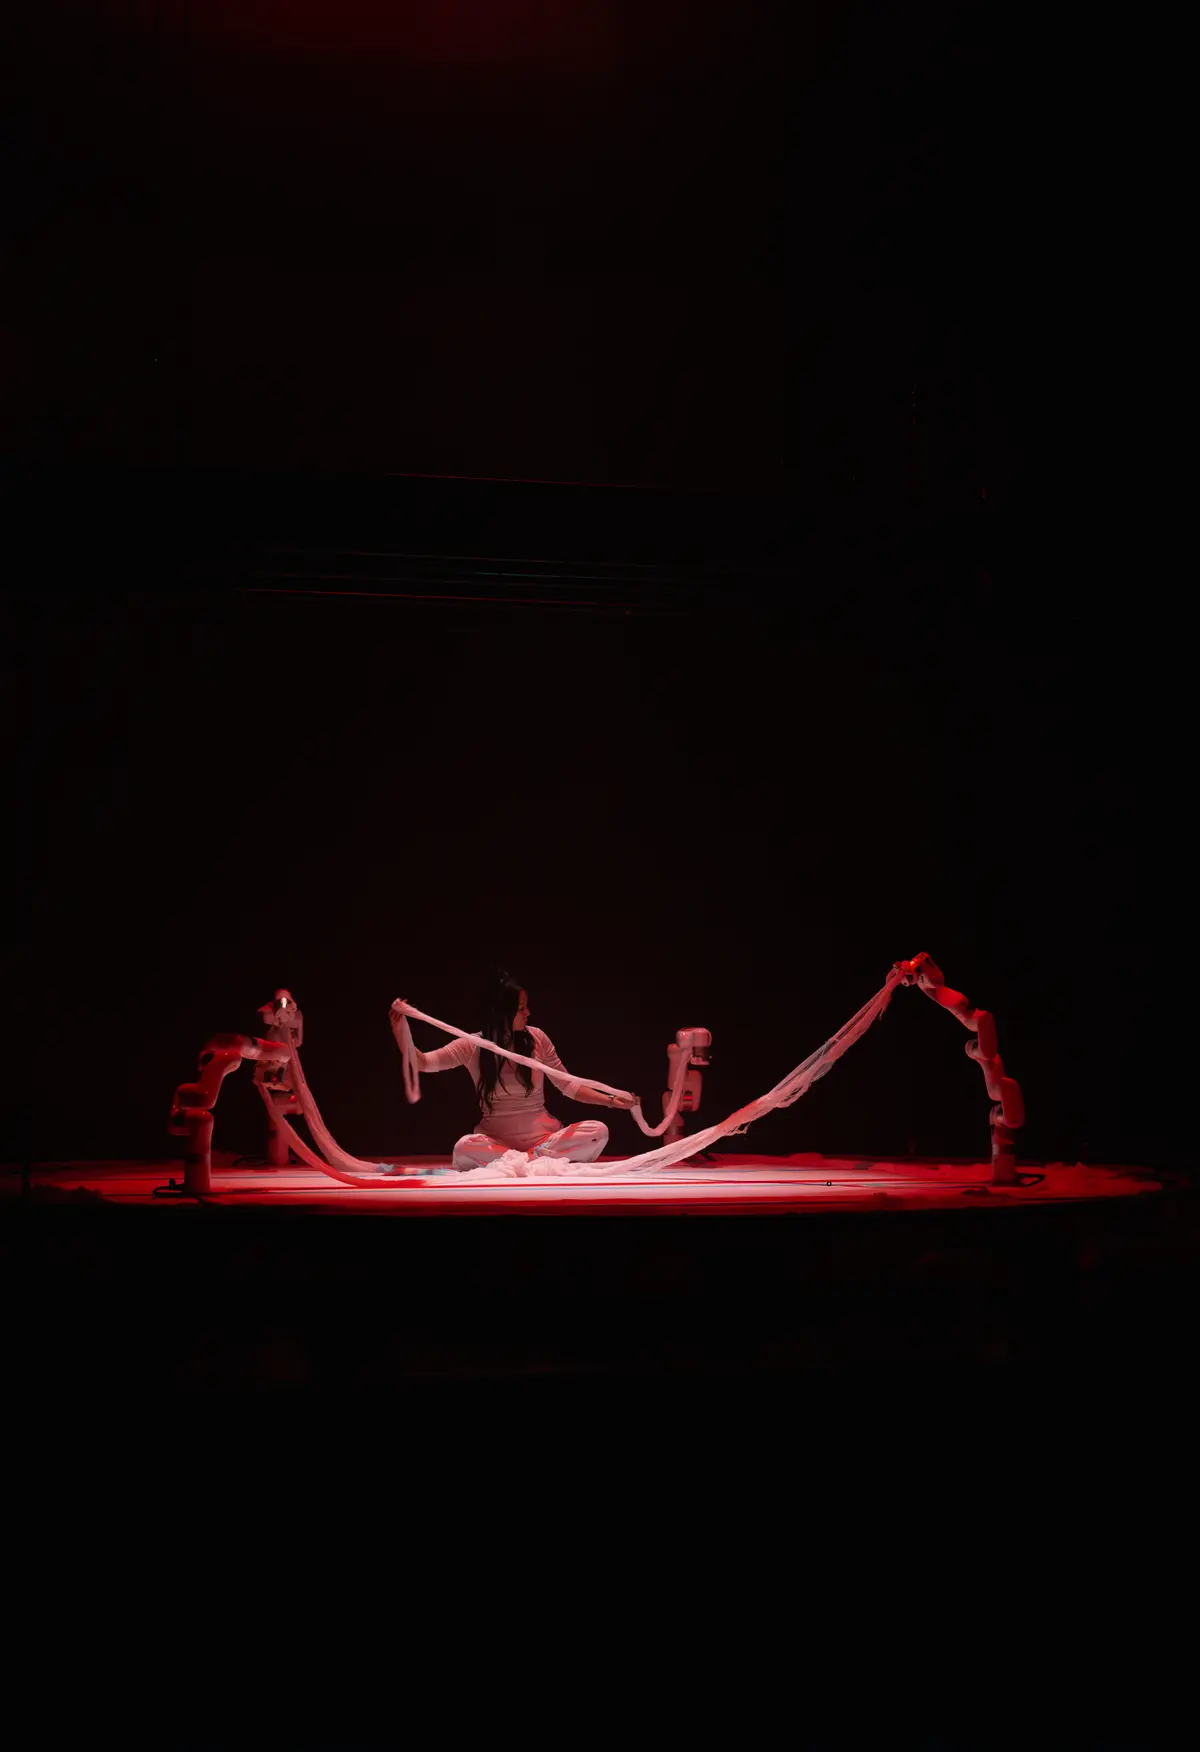 A person dressed in white is seated in the center of a stage under a red spotlight.